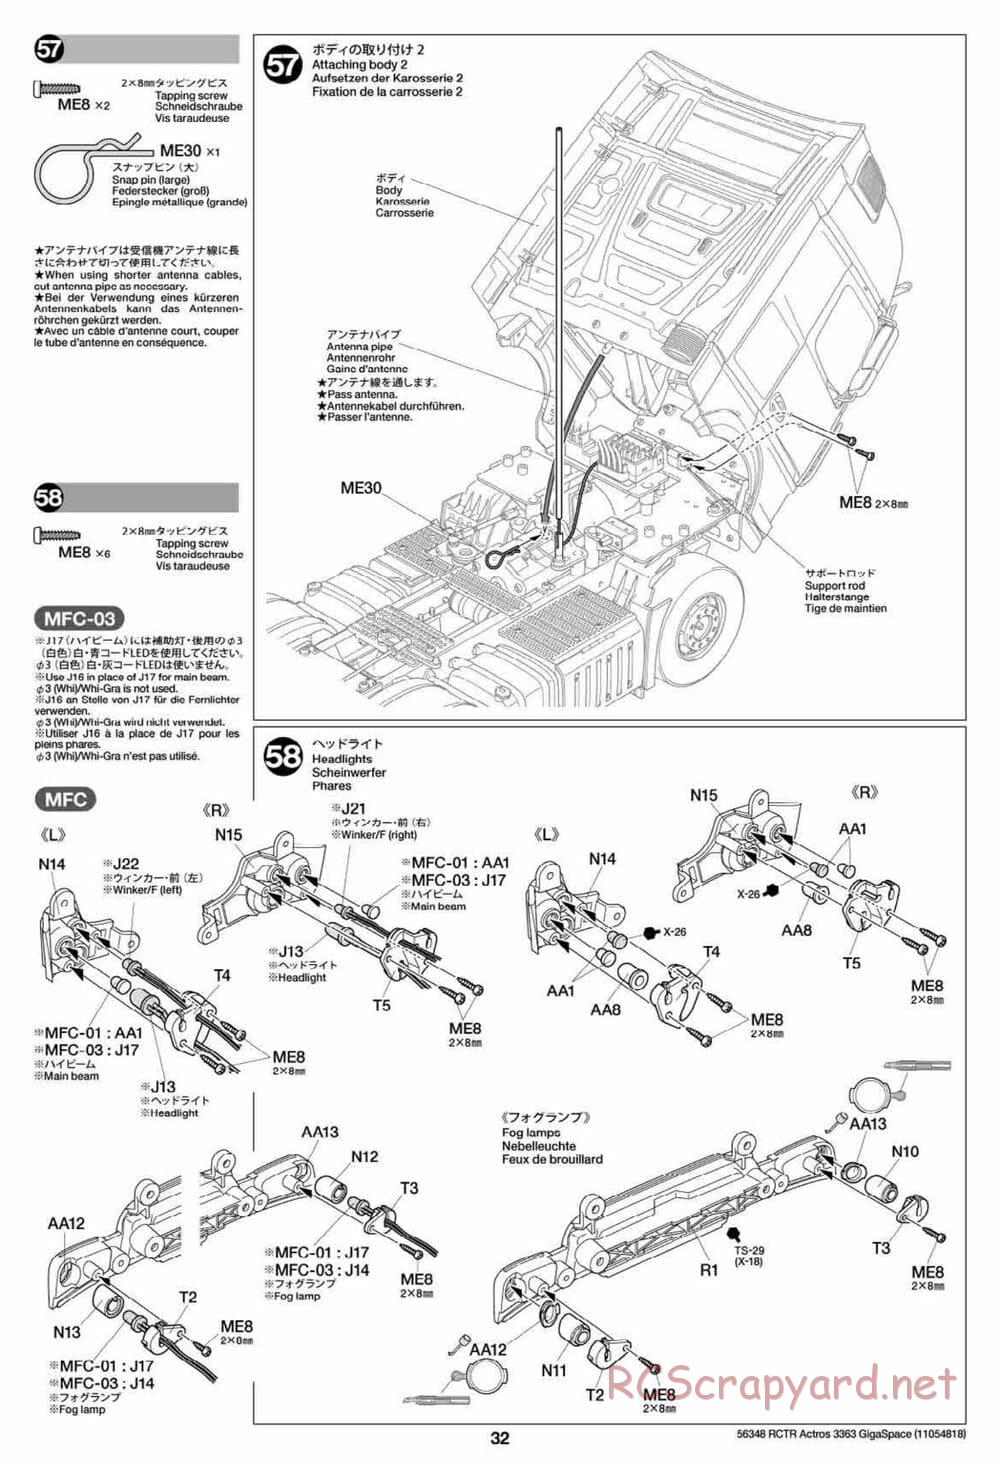 Tamiya - Mercedes-Benz Actros 3363 6x4 GigaSpace Tractor Truck Chassis - Manual - Page 32